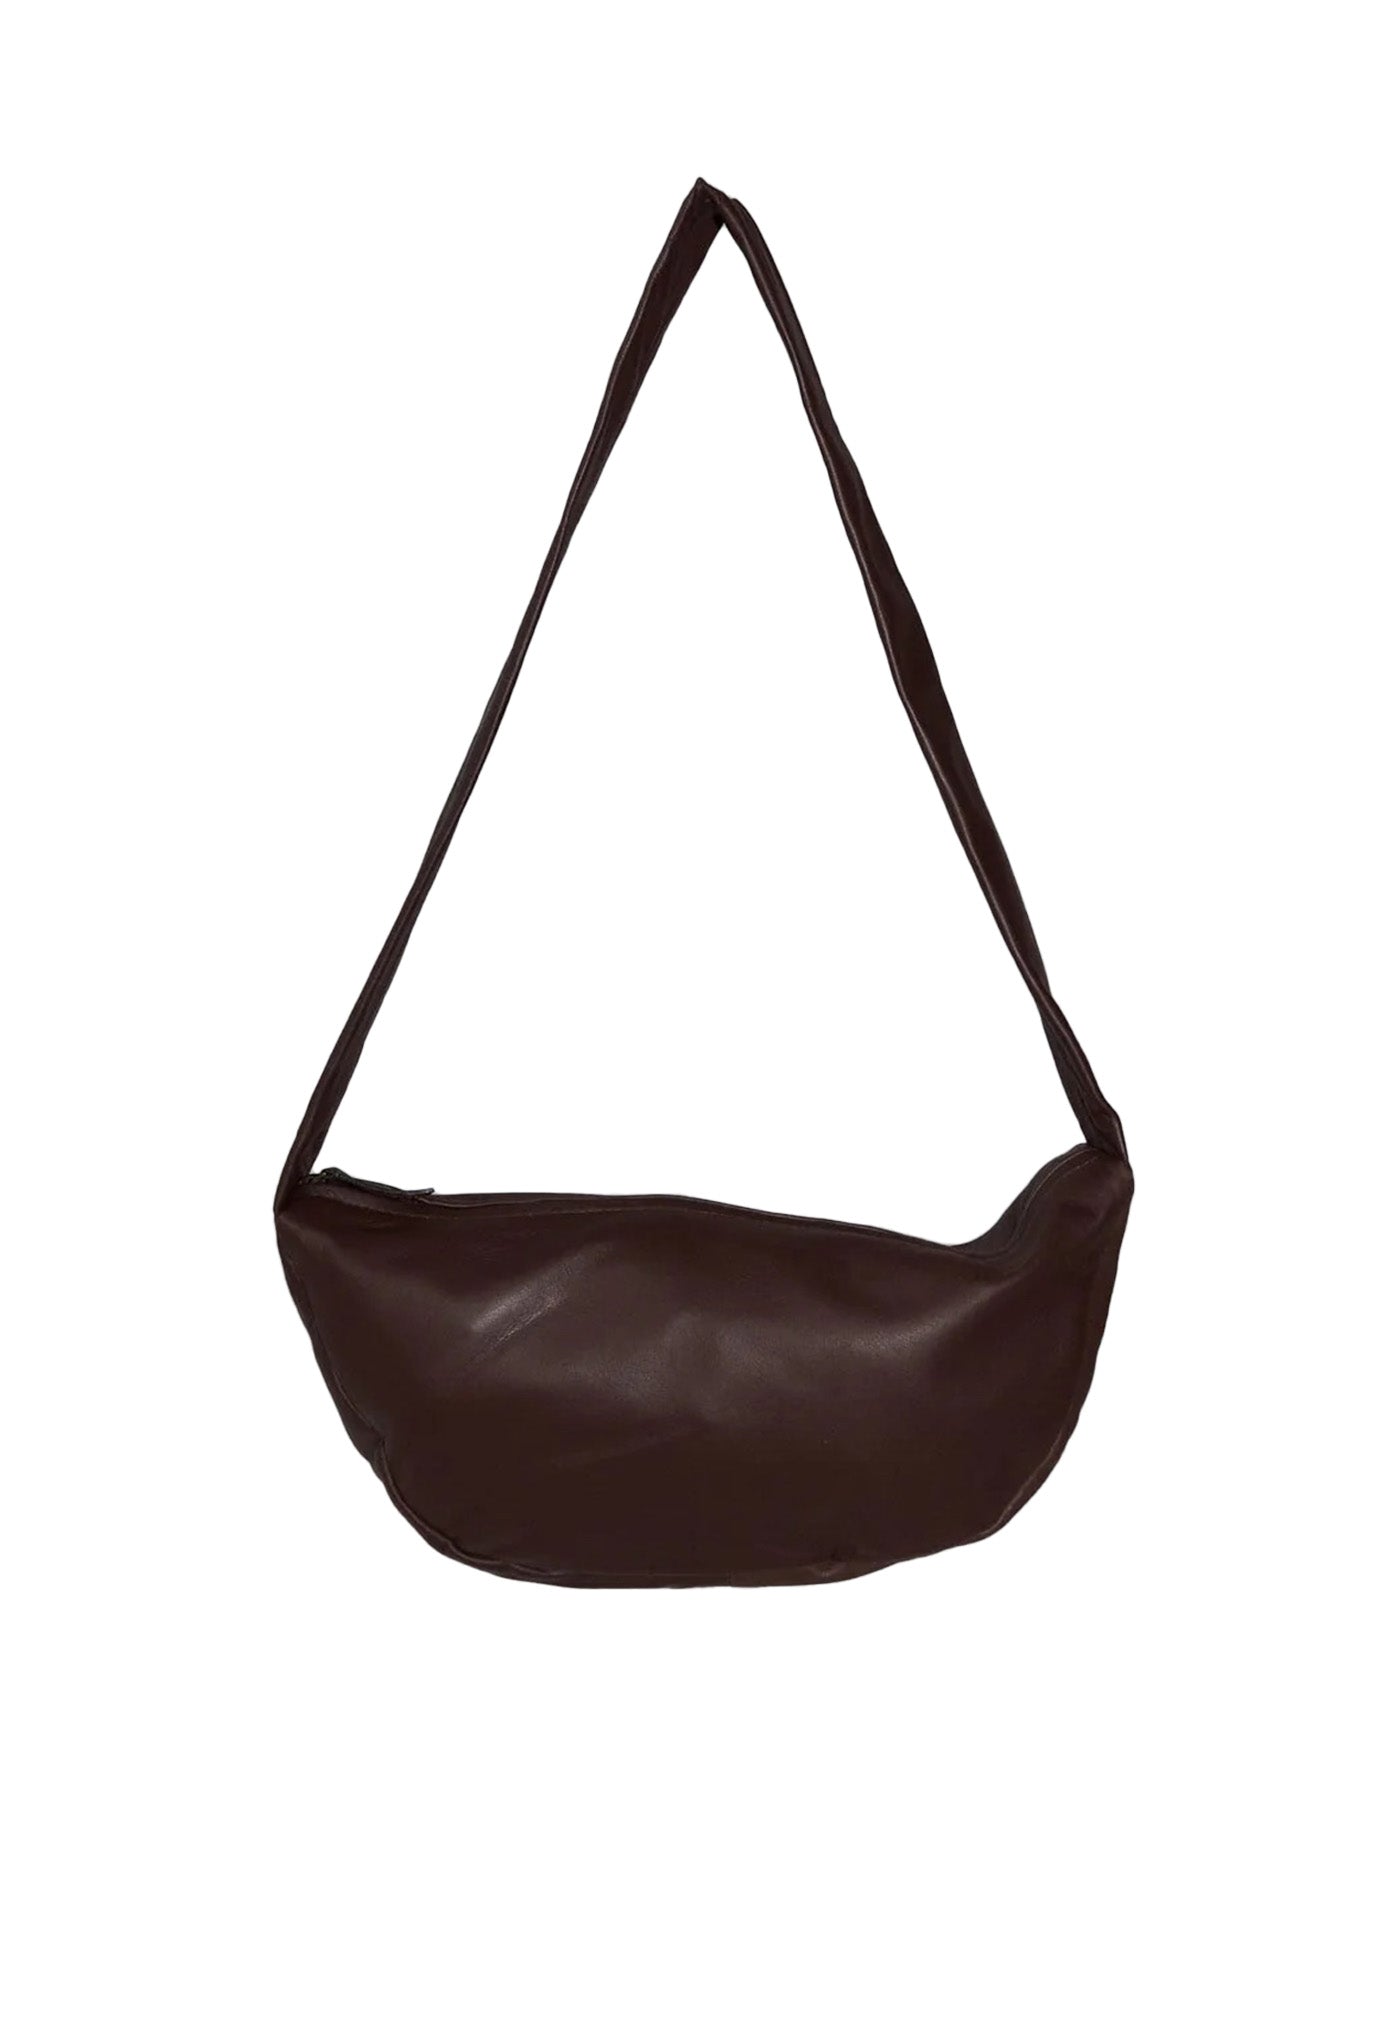 Soft Crescent Bag - Chocolate sold by Angel Divine